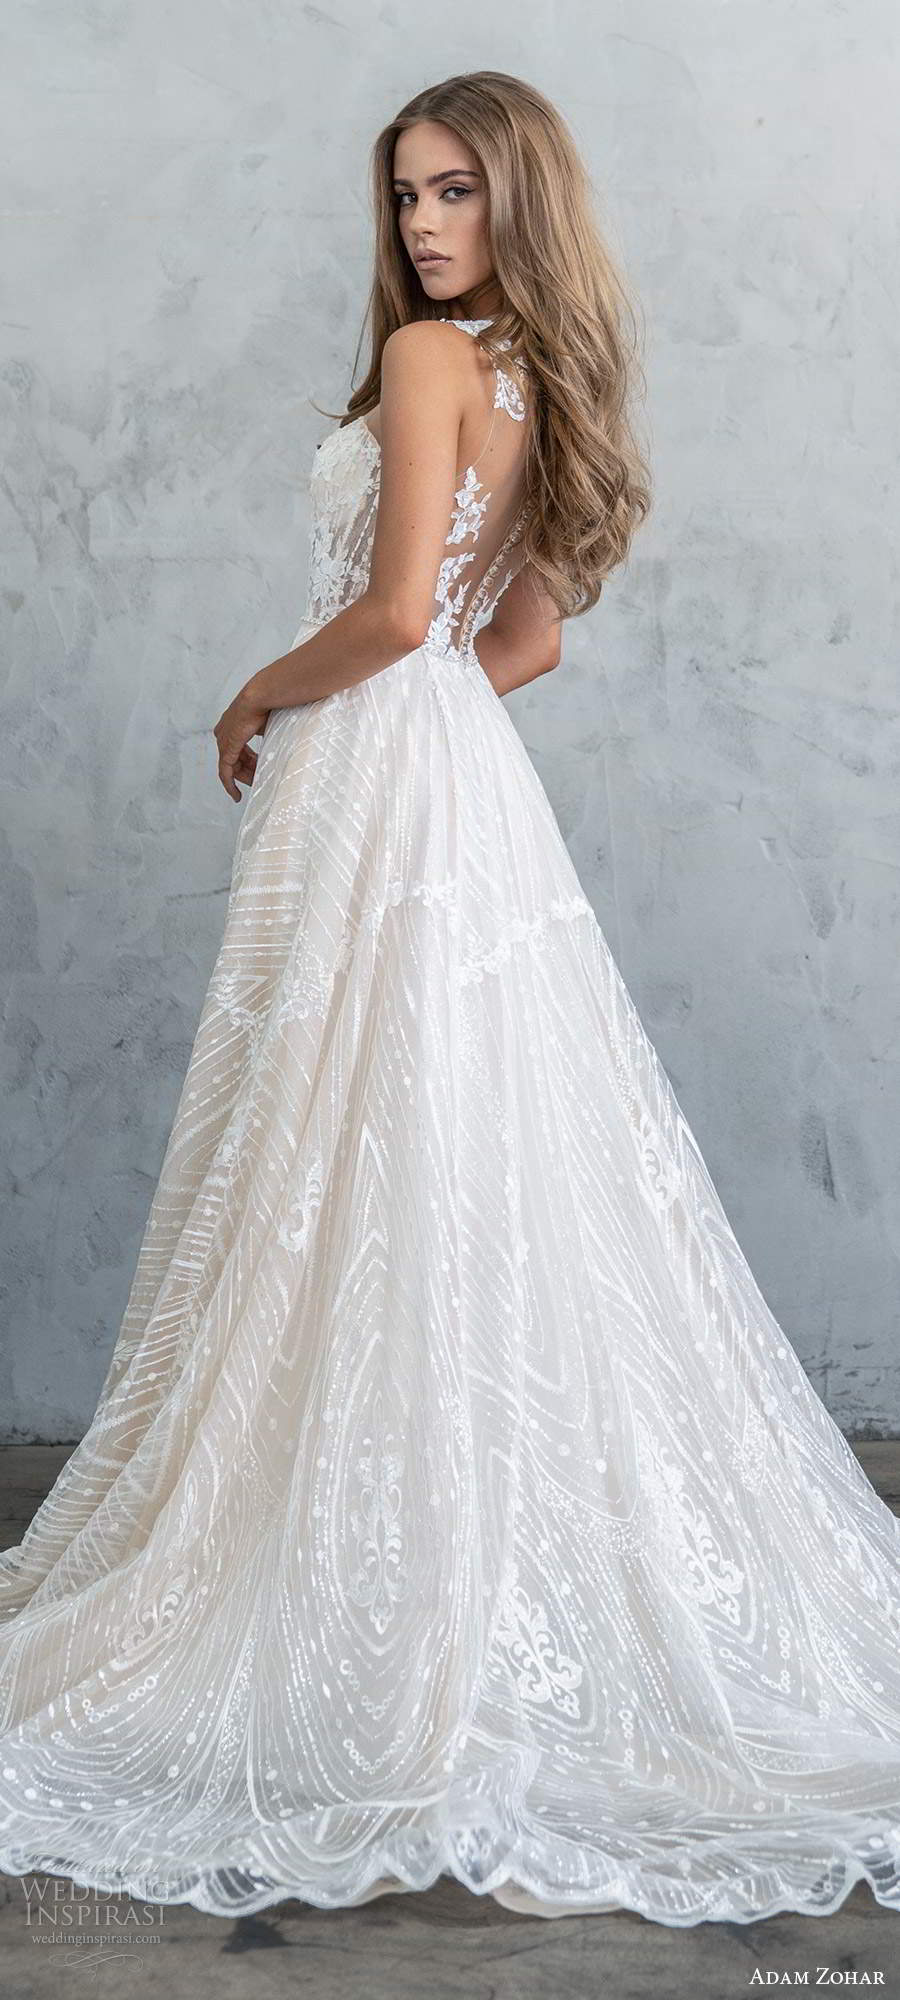 adam zohar fall 2020 bridal sleeveless illusion jewel neck plunging sweetheart neckline fully embellished lace a line ball gown wedding dress sheer back chapel train (5) bv